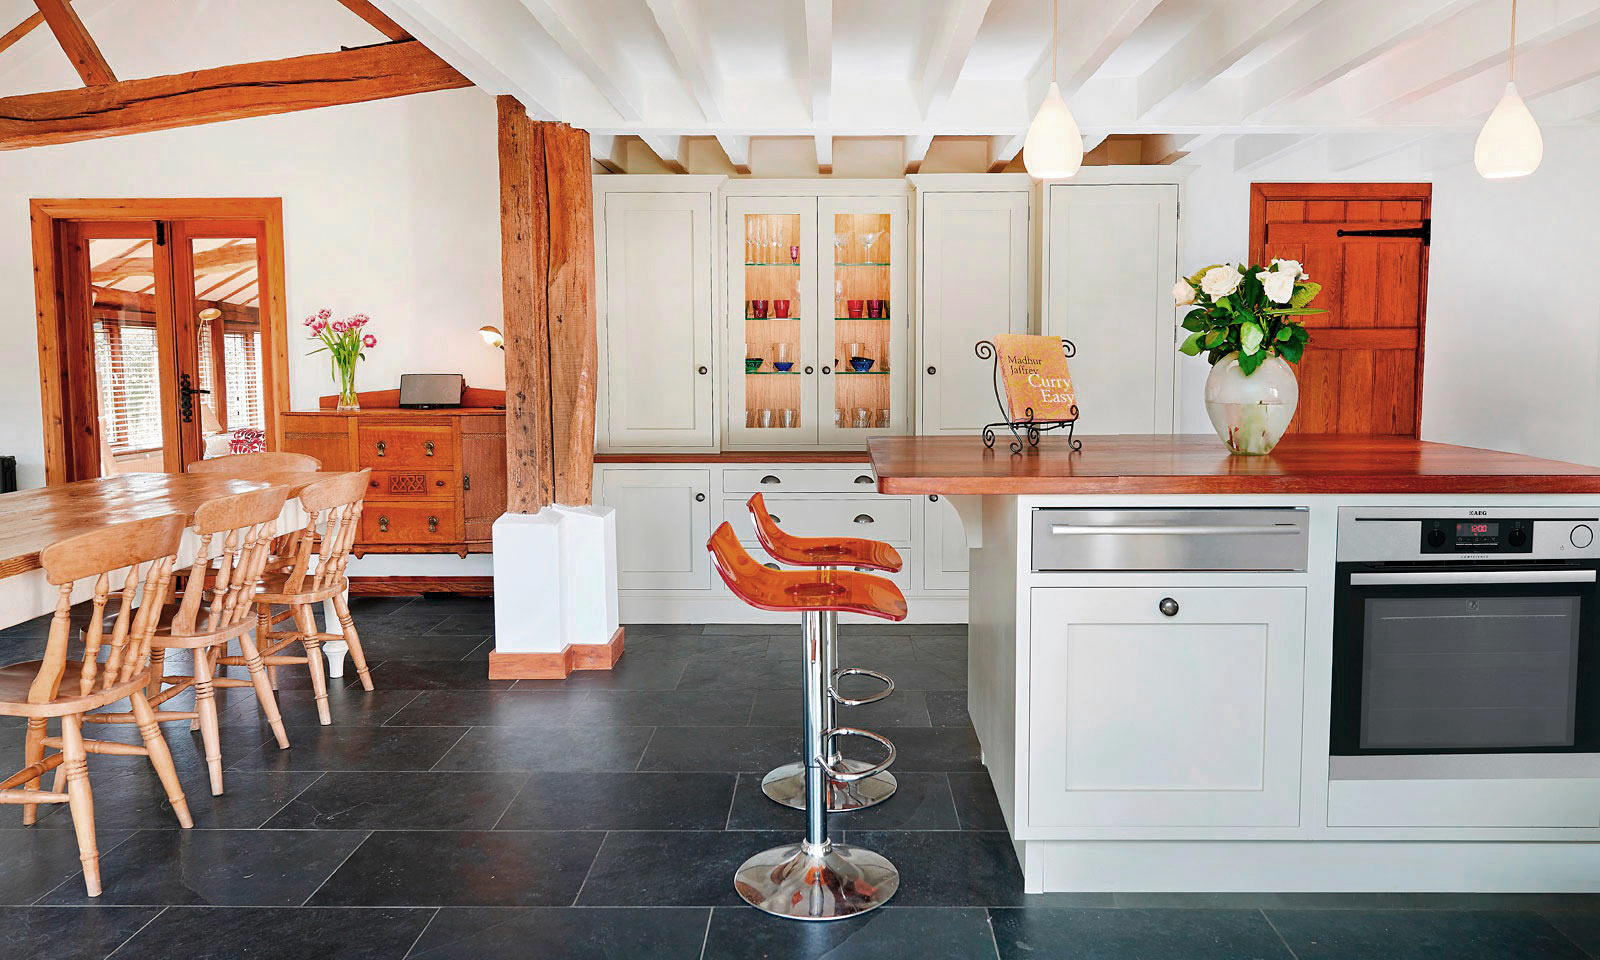 Golford. A classic handmade, hand-painted, Shaker style kitchen, installed in a large barn. A bespoke hand-crafted kitchen manufactured by the skilled cabinet makers at Mounts Hill Woodcraft.